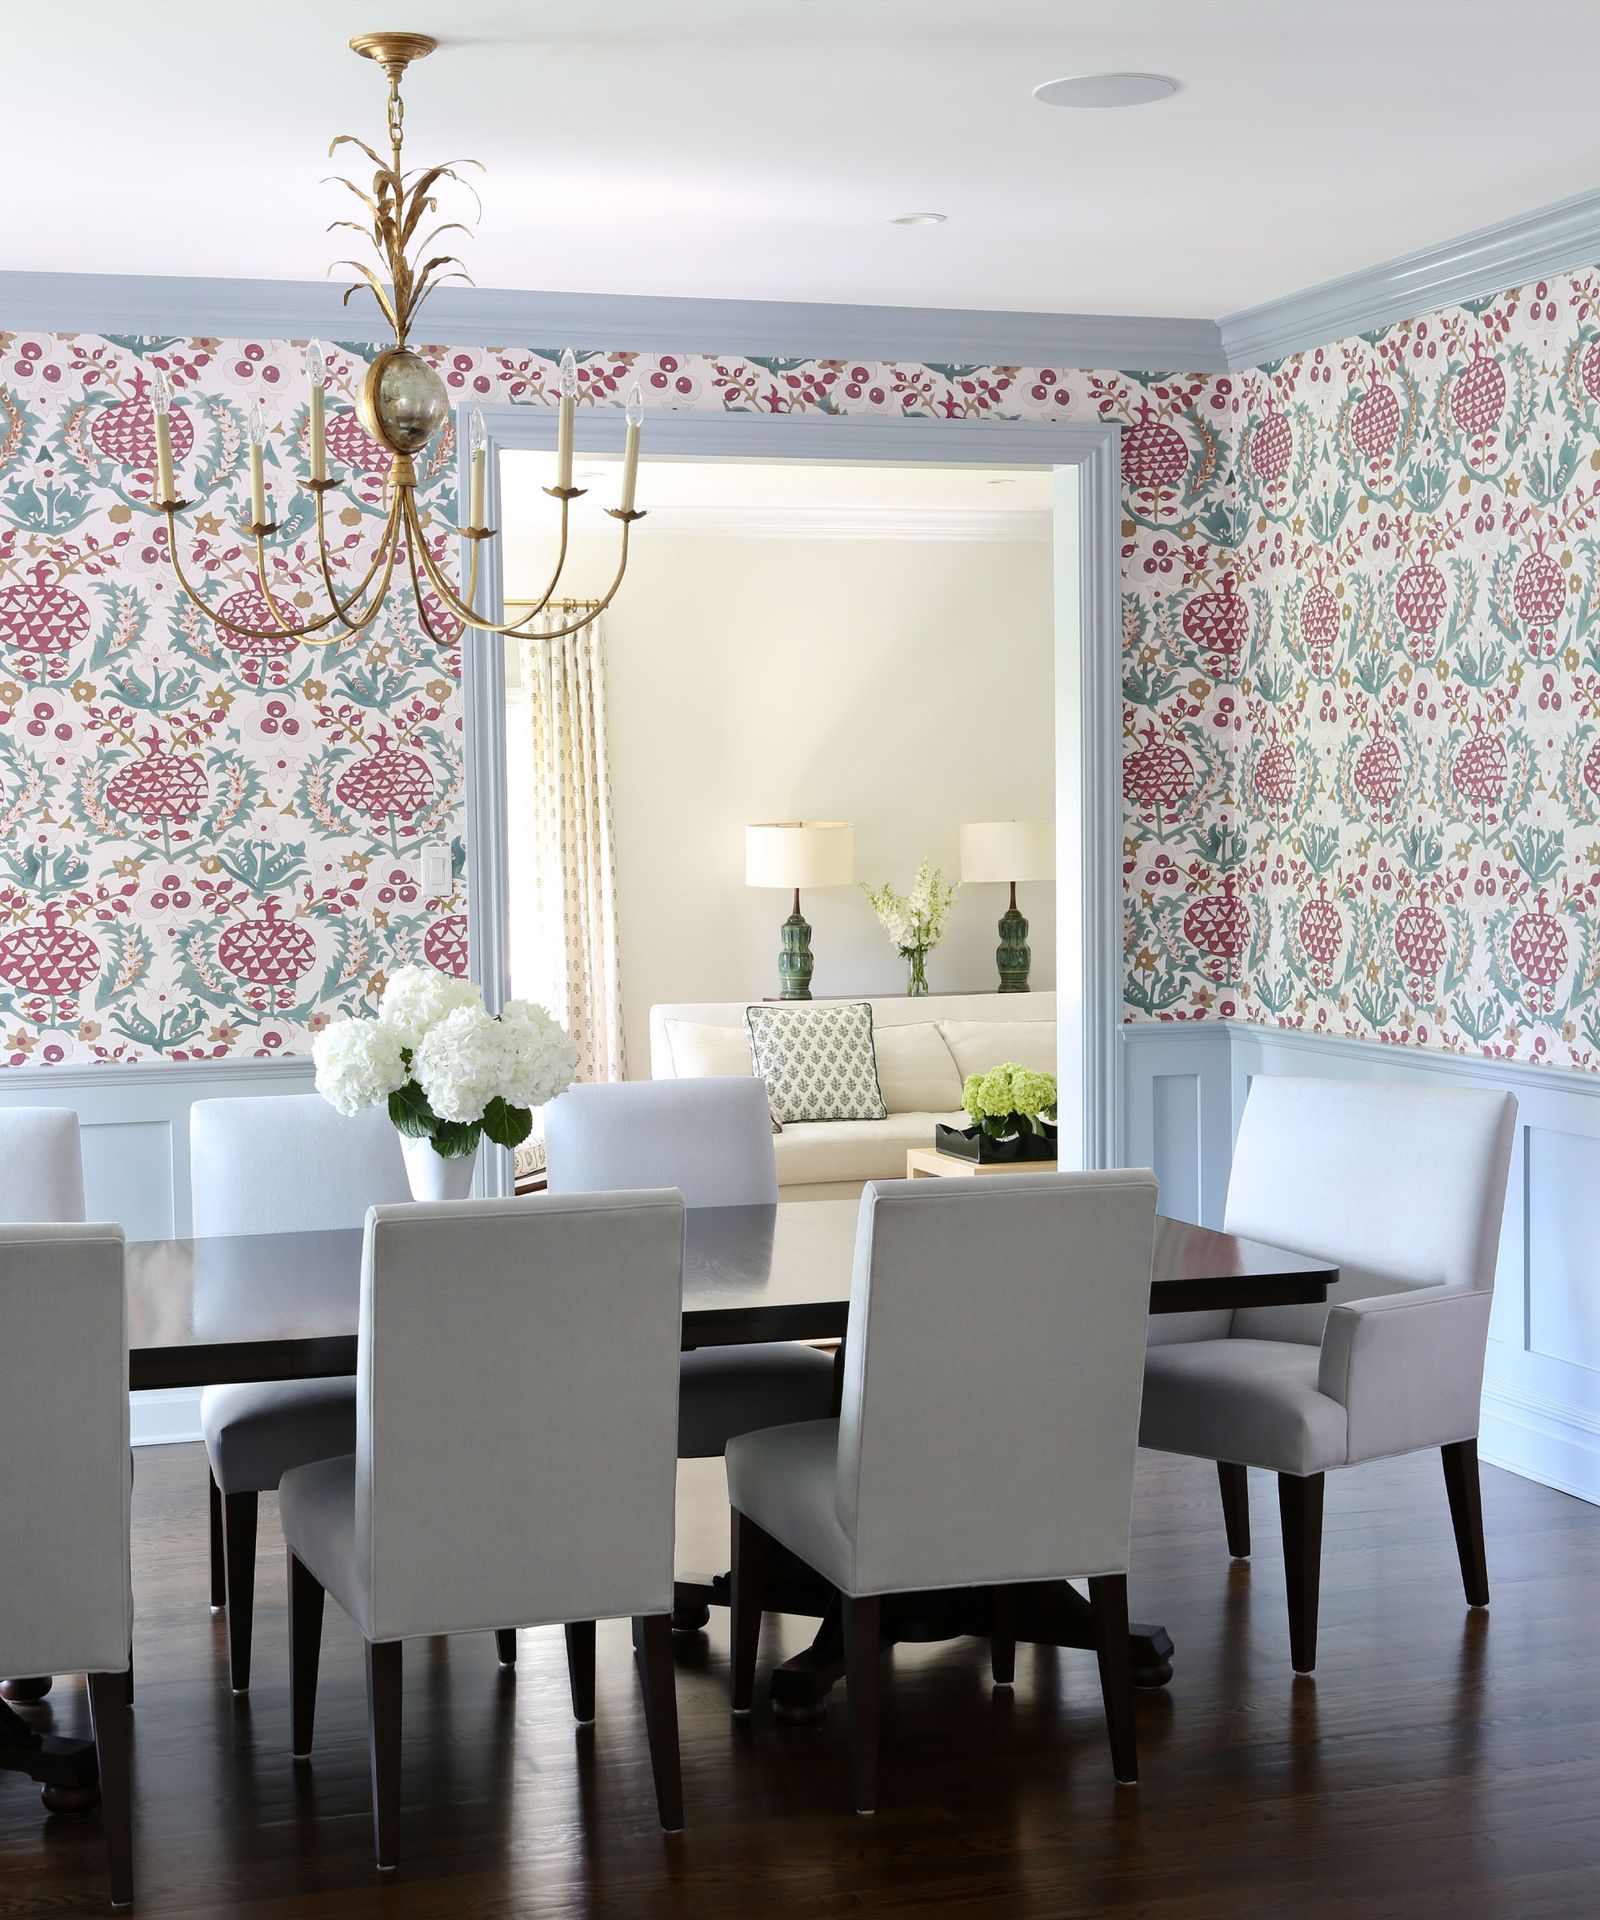 Dining room paint ideas: 13 paint colors to inspire